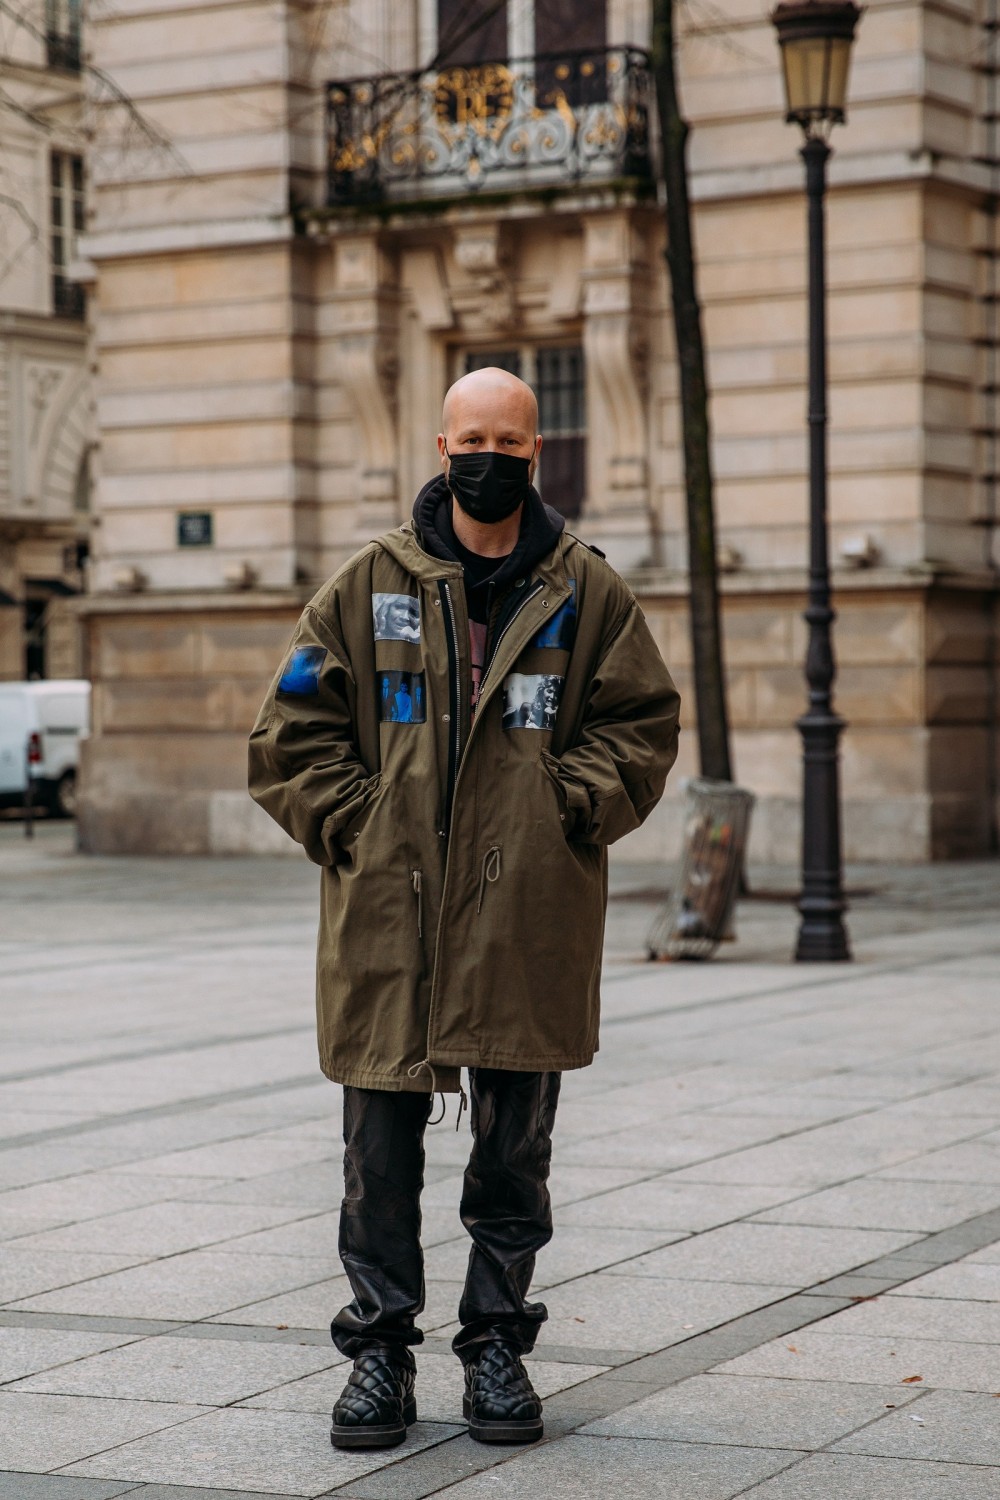 Street Style Trend Tracking Making a Case for Utility Fashion Amidst the Pandemic